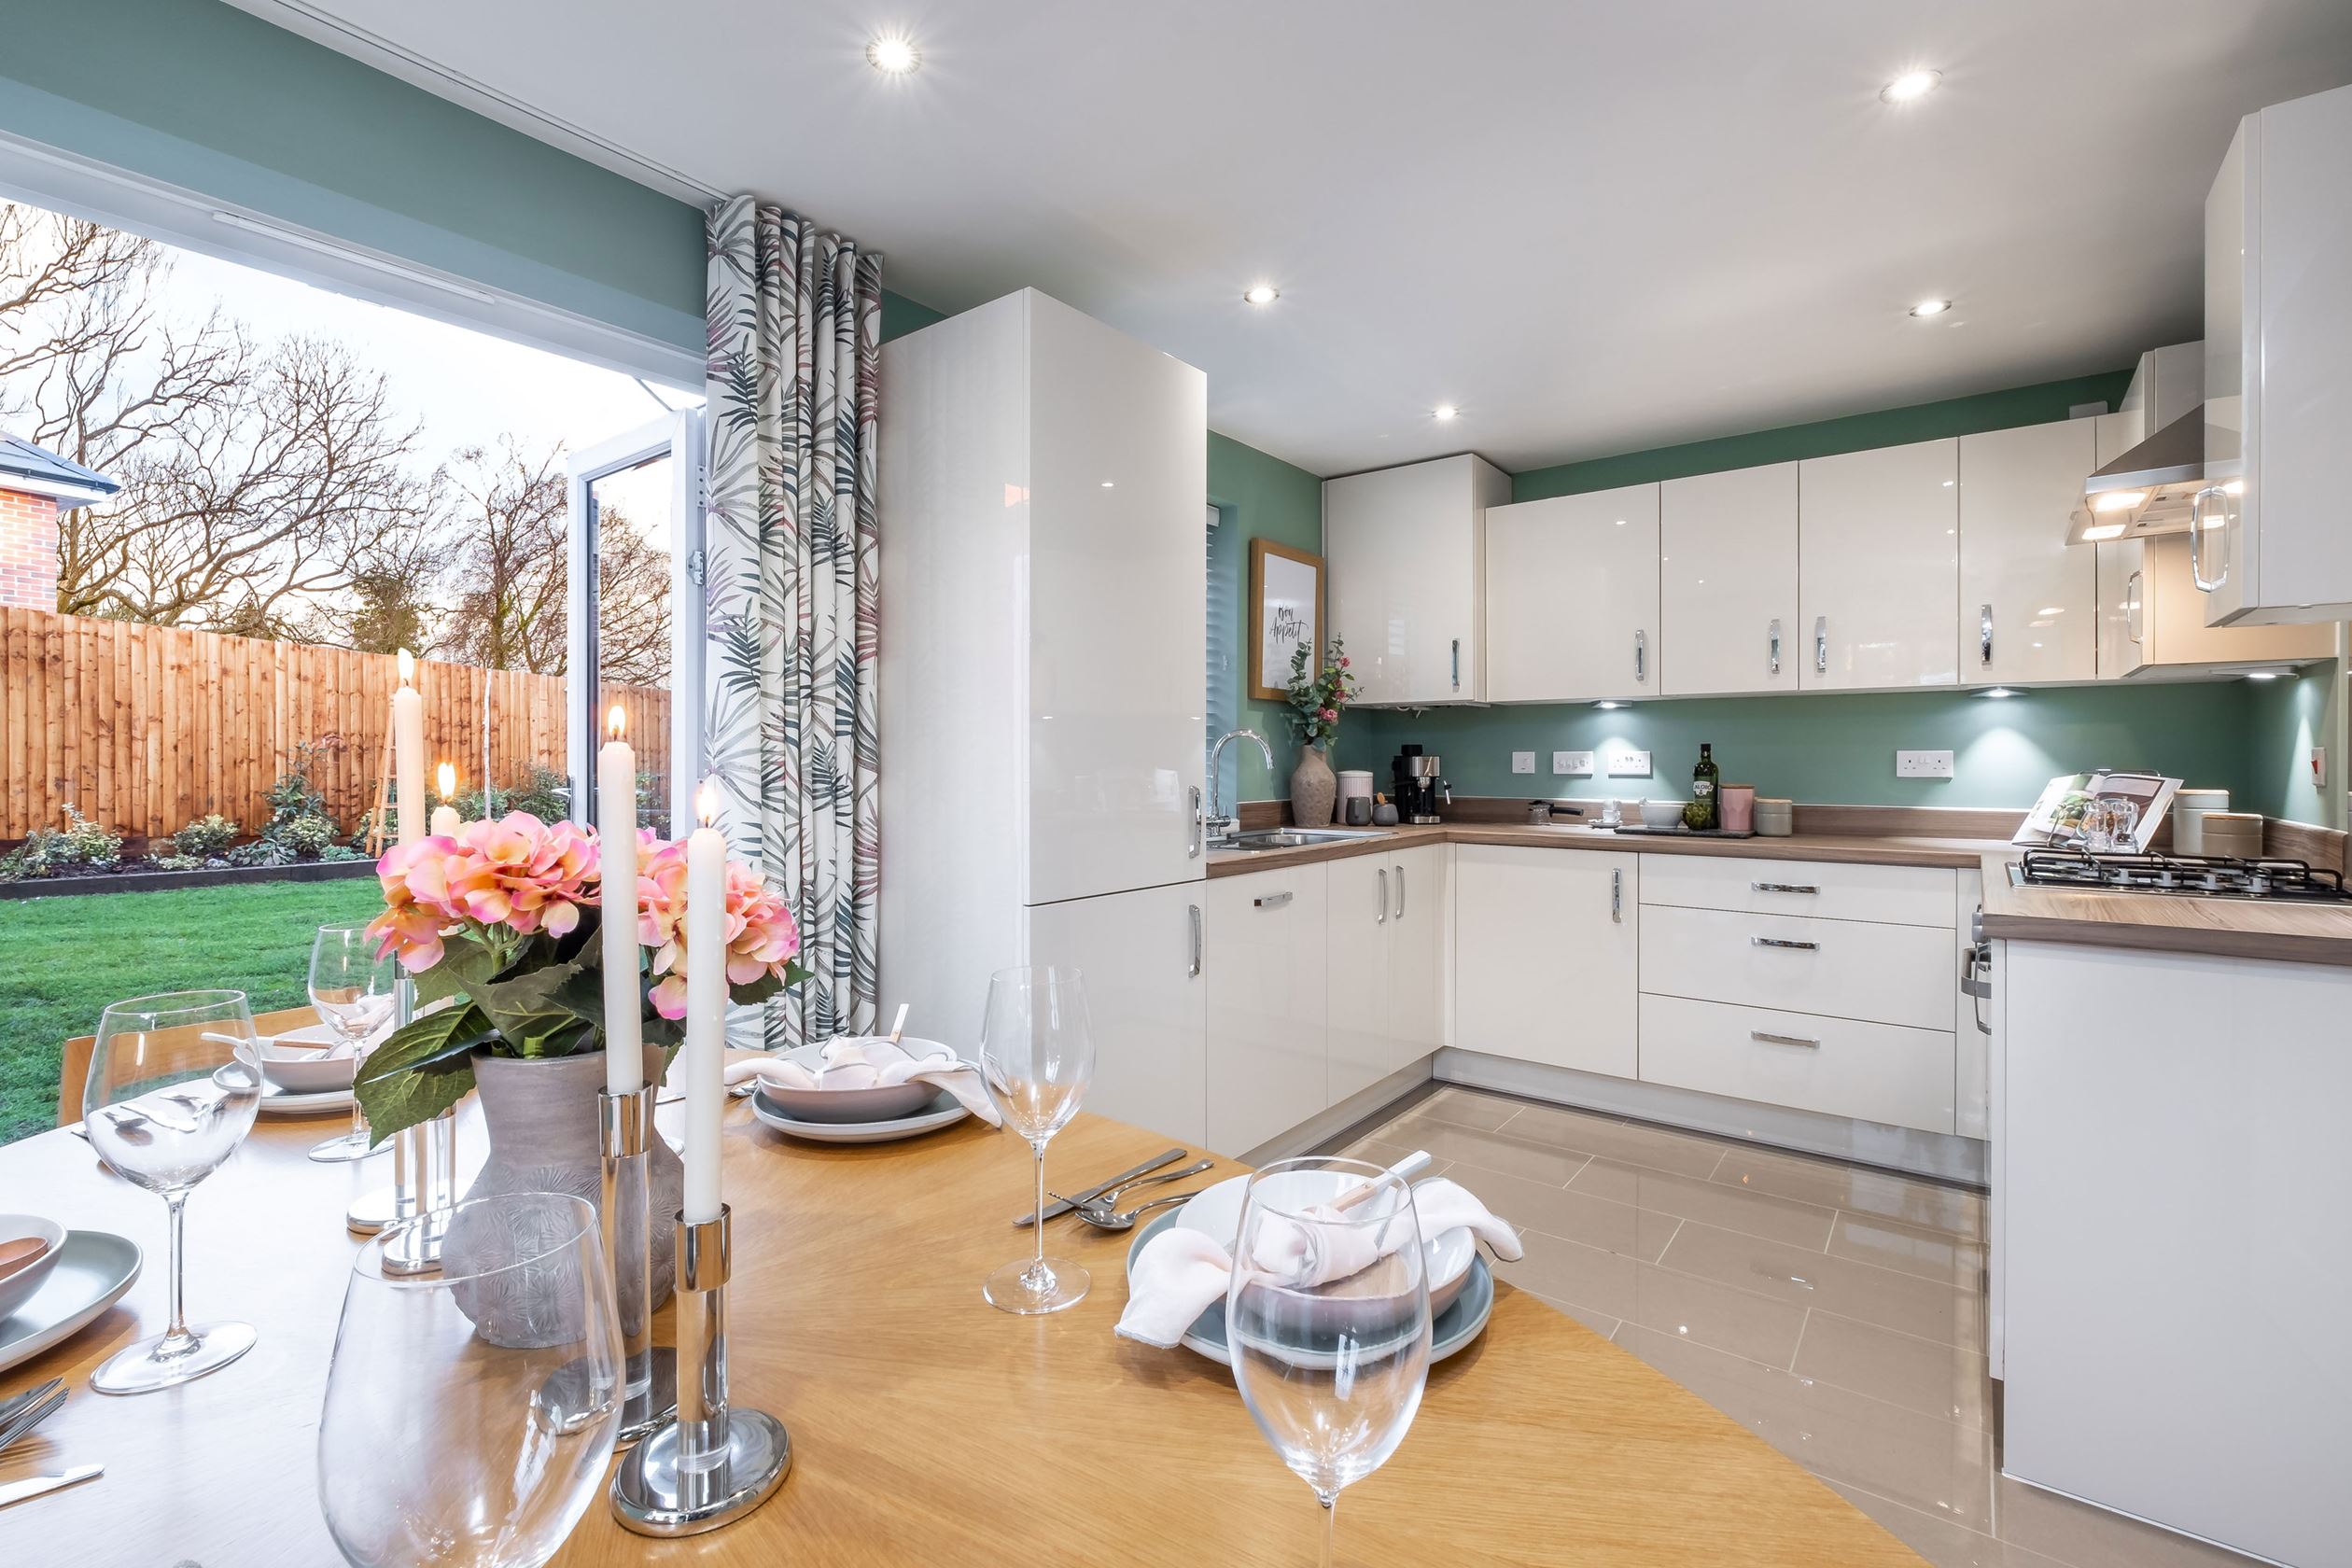 Property 2 of 9. Moresby Kitchen